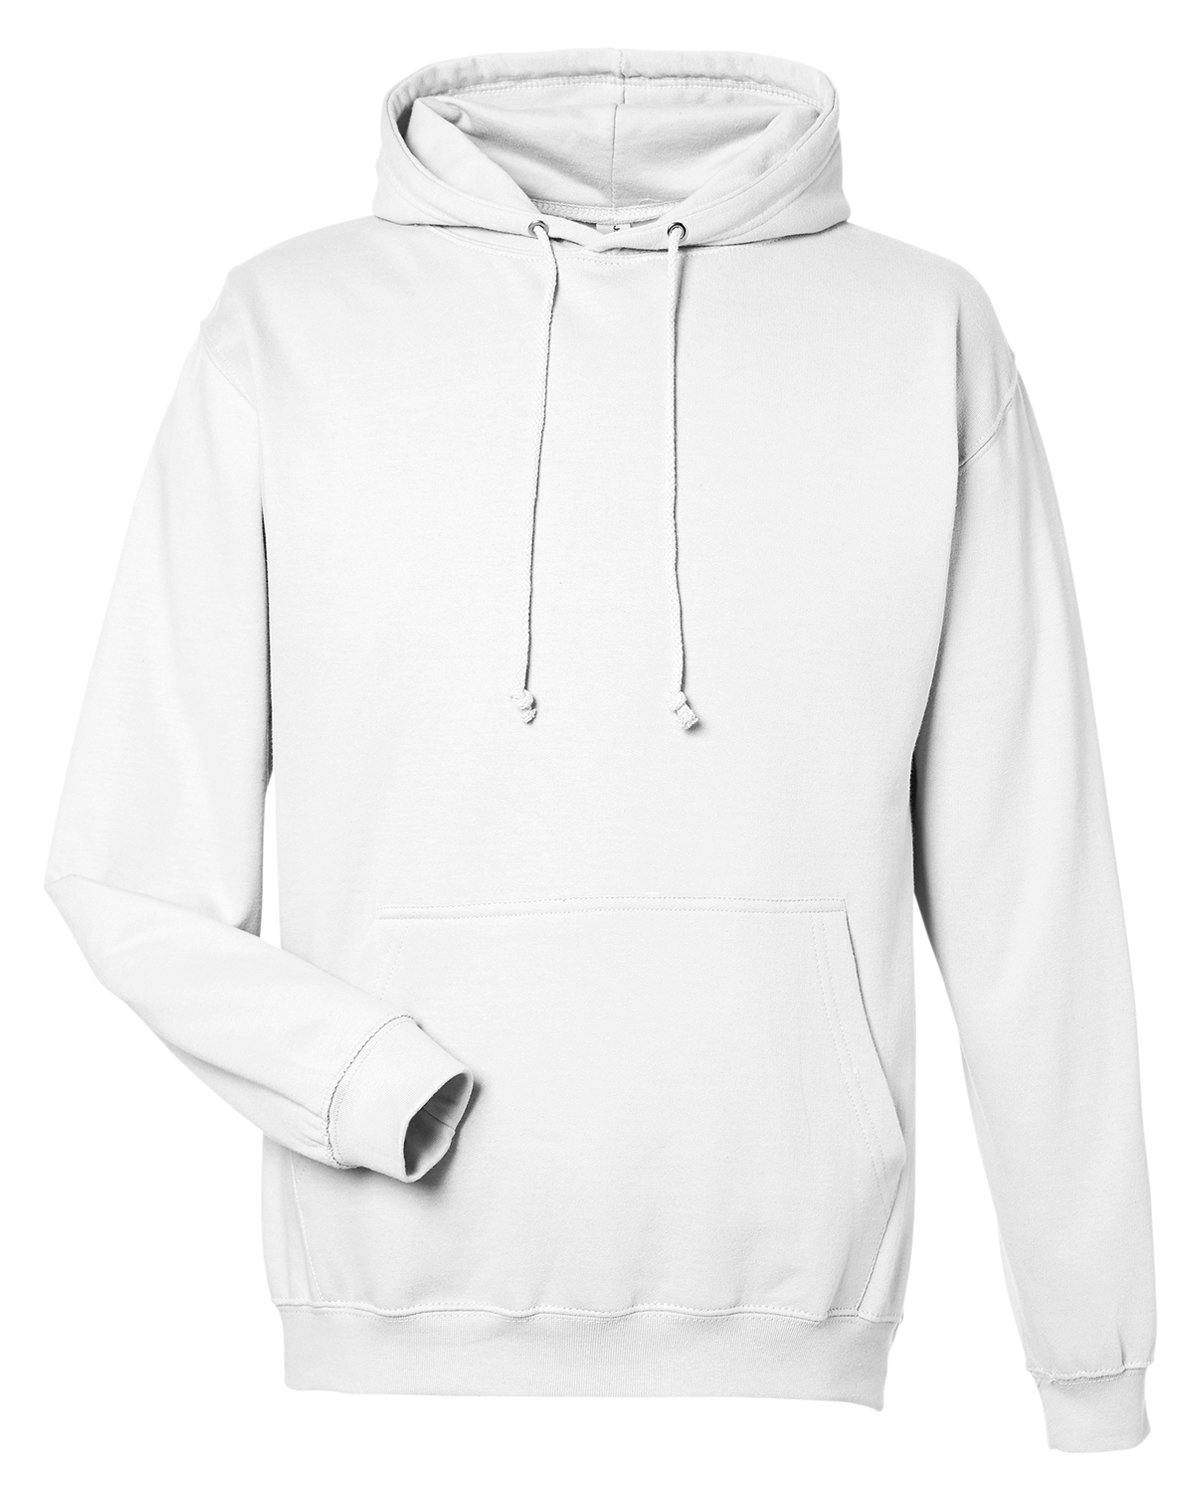 Image for Men's Midweight College Hooded Sweatshirt